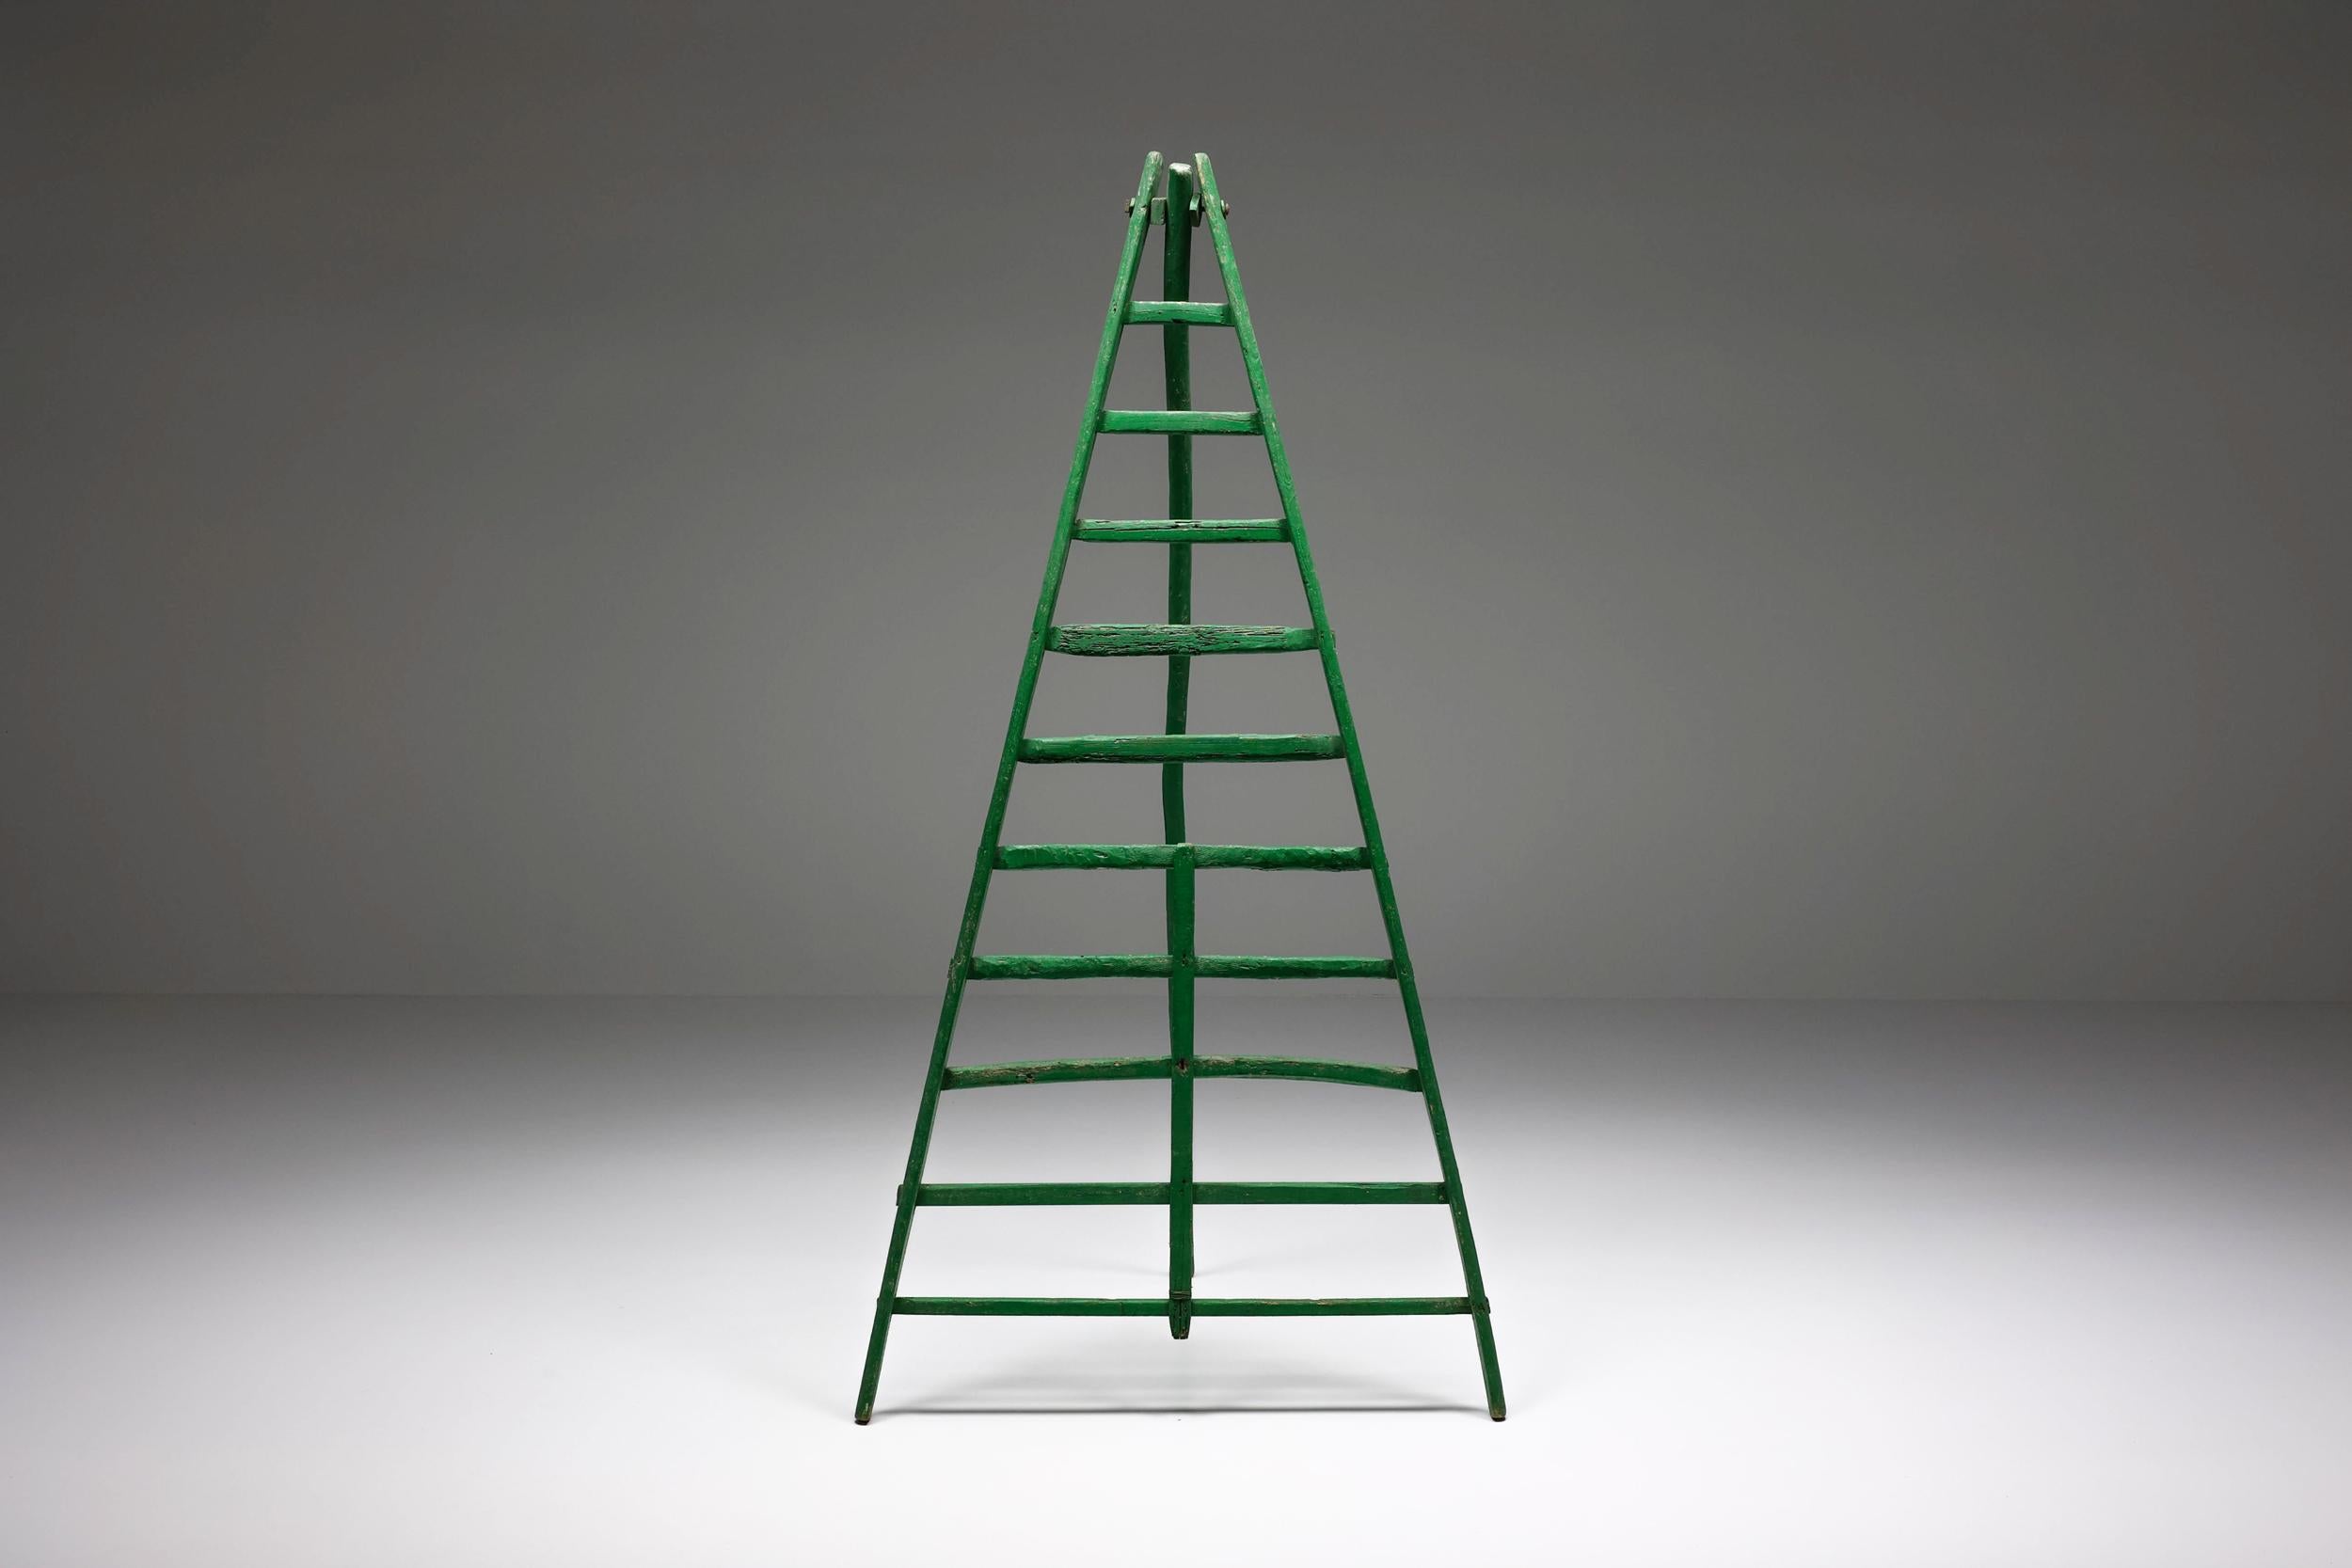 Ladder; figurative sculpture; objet trouvé; 19th Century; France; craftsmanship;


Figurative sculpture and 'objet trouvé' green fruit picking ladder made in the late 19th century in France. The depth is self-adjustable and the green patina